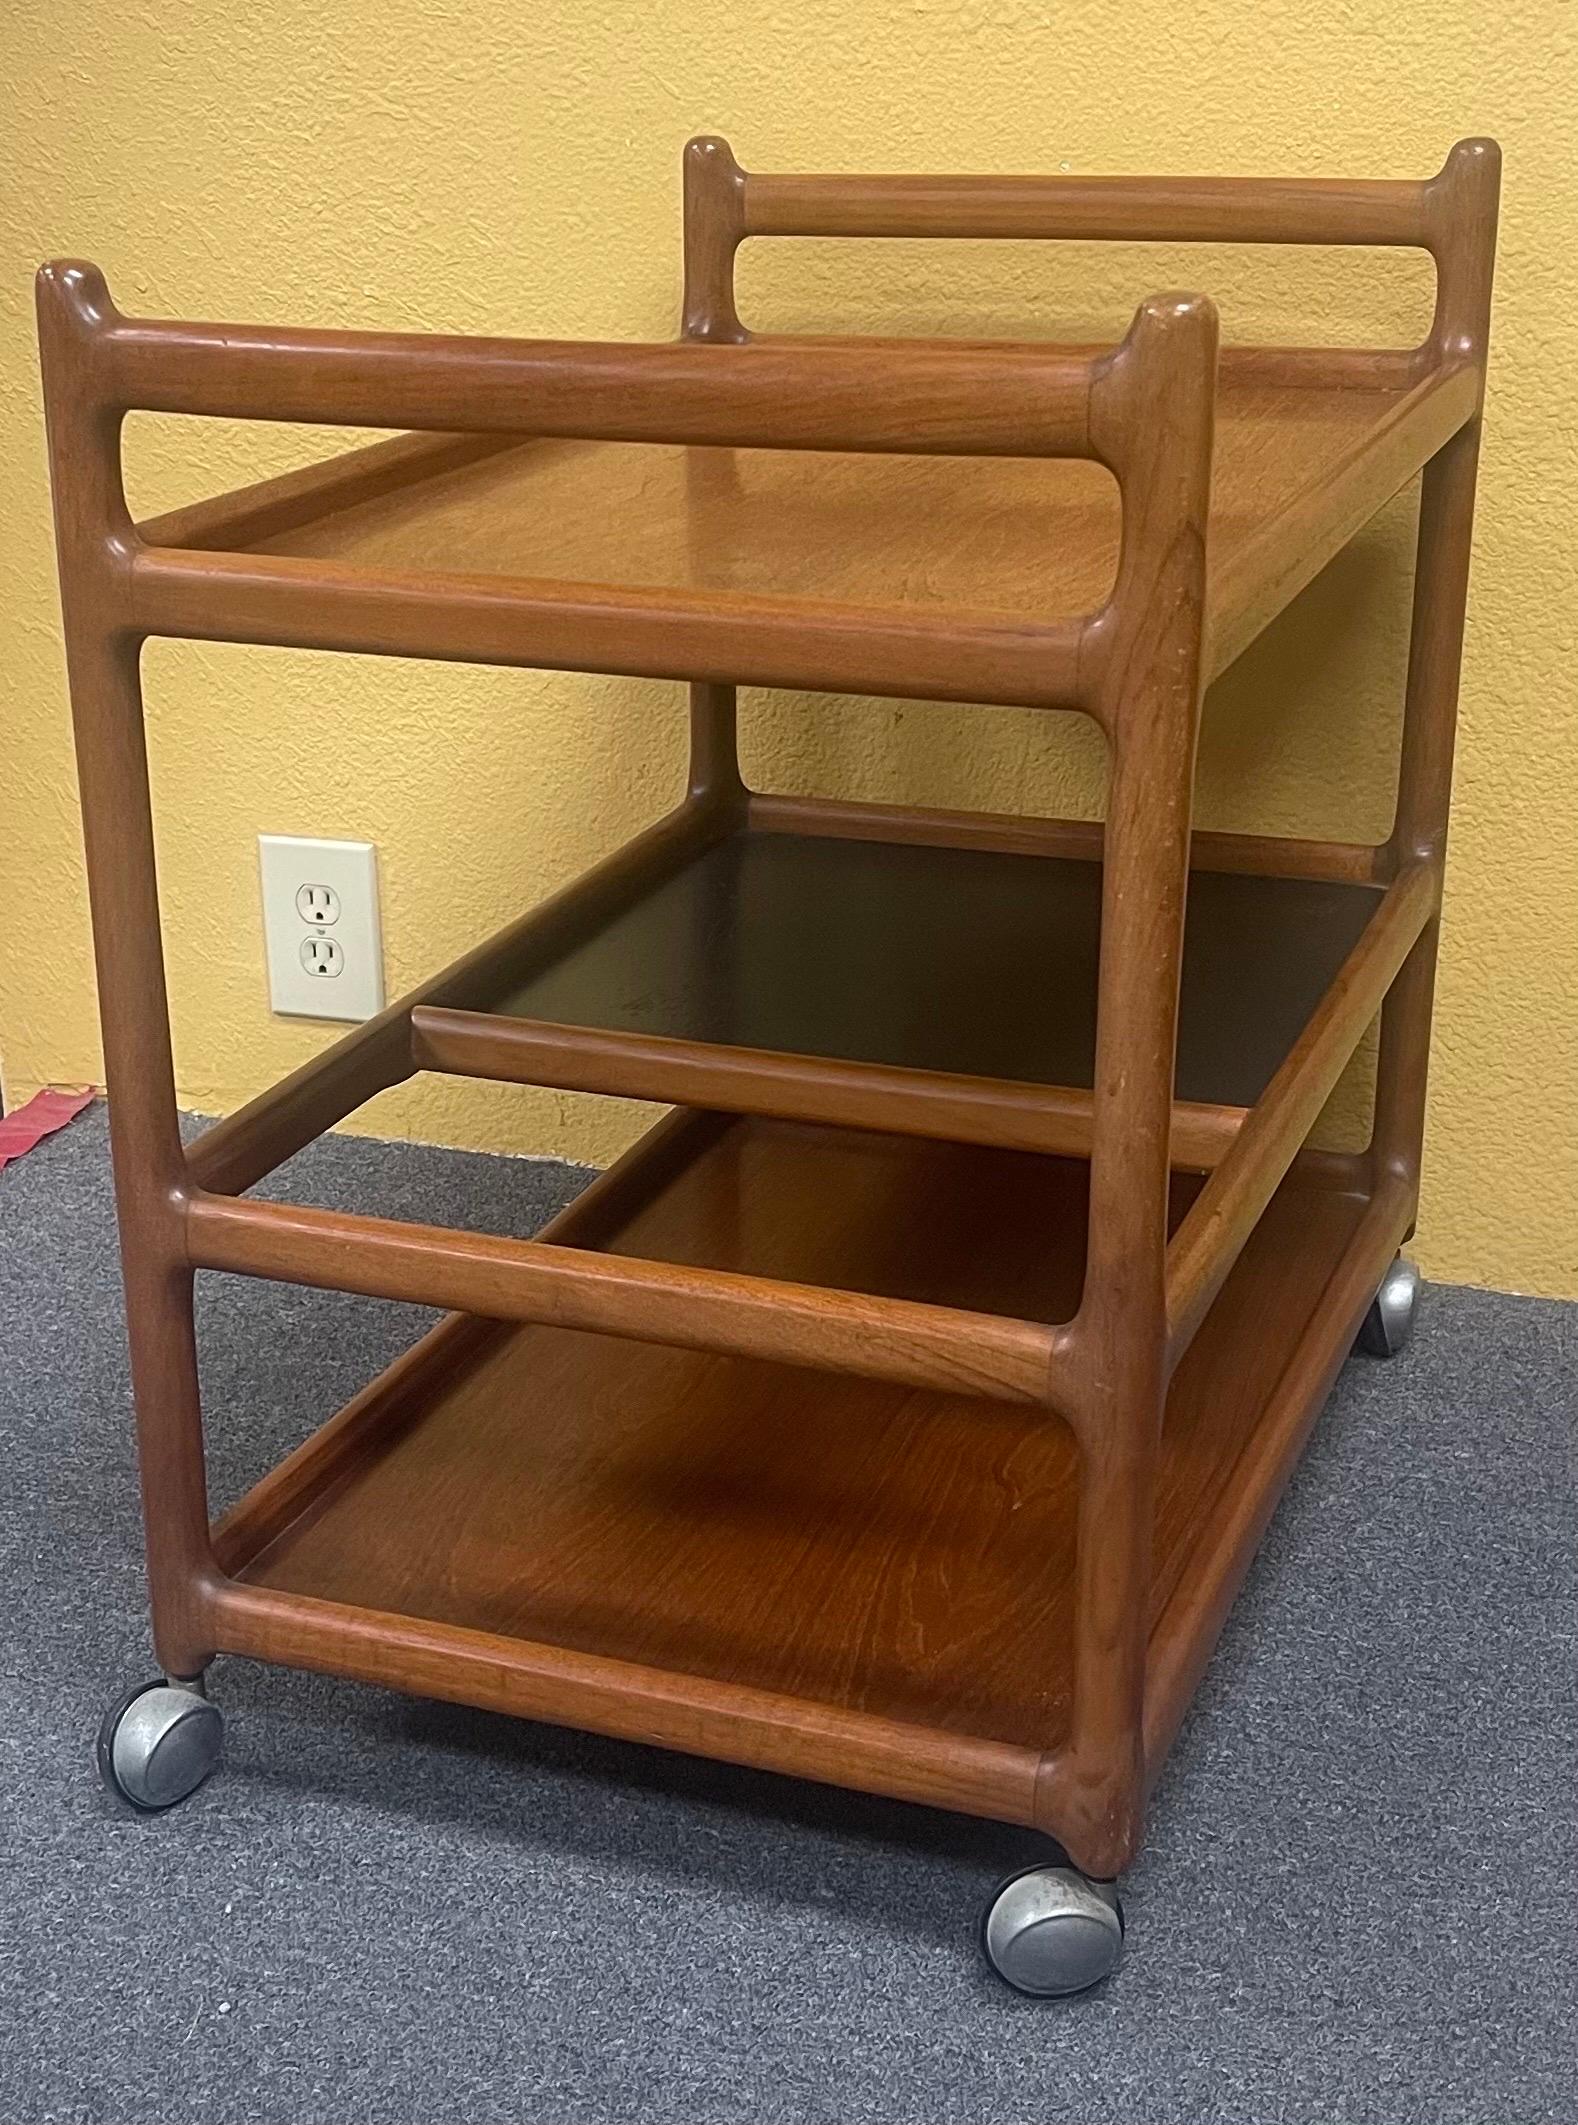 Danish Modern Teak Bar Cart / Serving Trolley with Shelves by Johannes Andersen In Good Condition For Sale In San Diego, CA